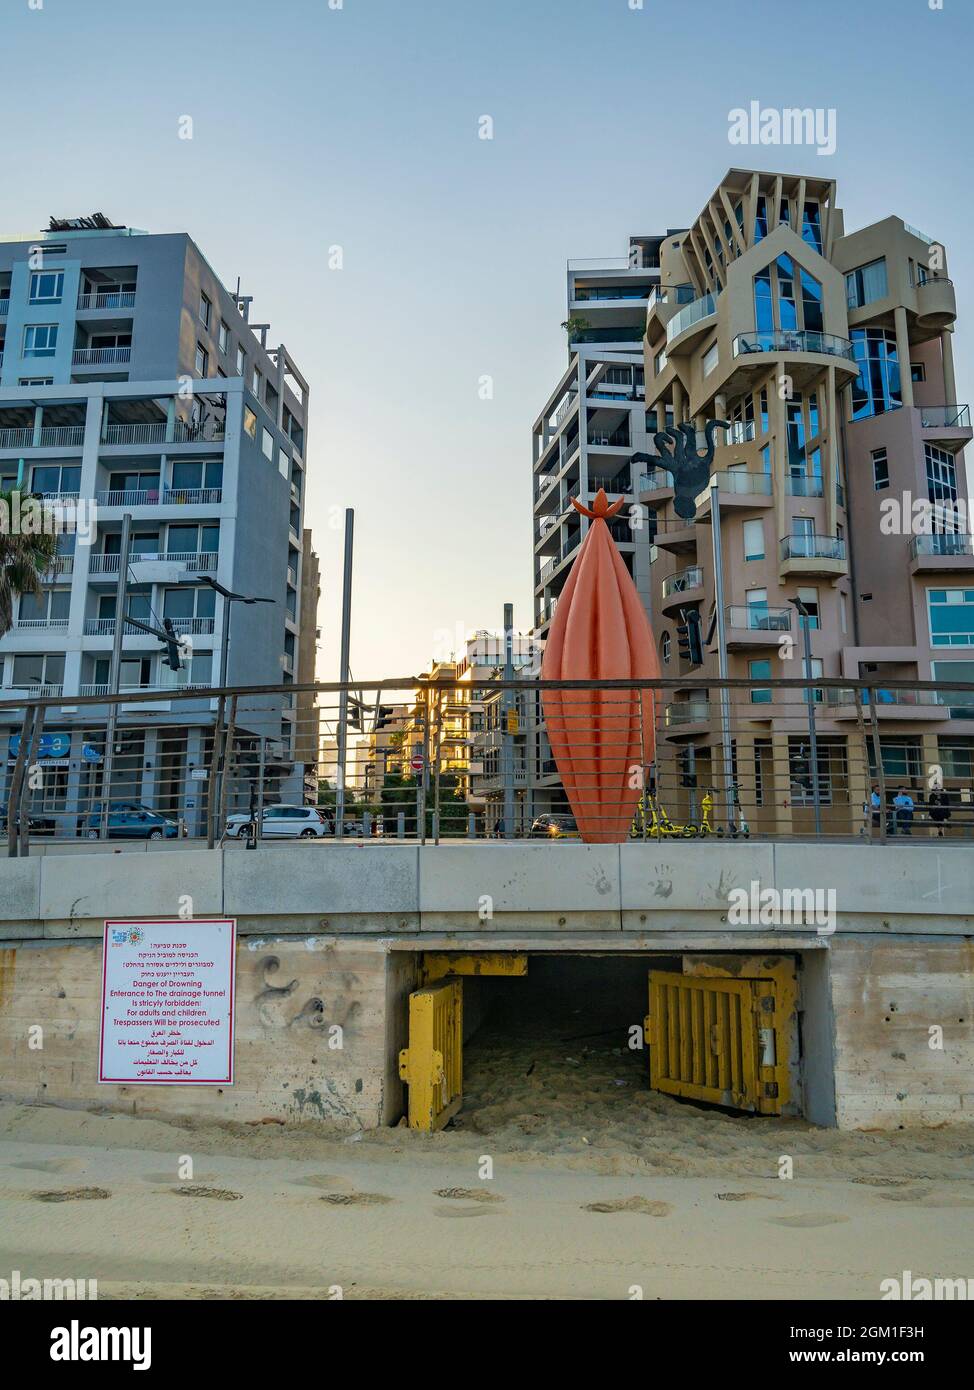 Tel Aviv, Israel - August 20th, 2021: An entrance to a drainage tunnel, under the buildings of Tel Aviv, Israel, with a multilingual warning sign. Stock Photo